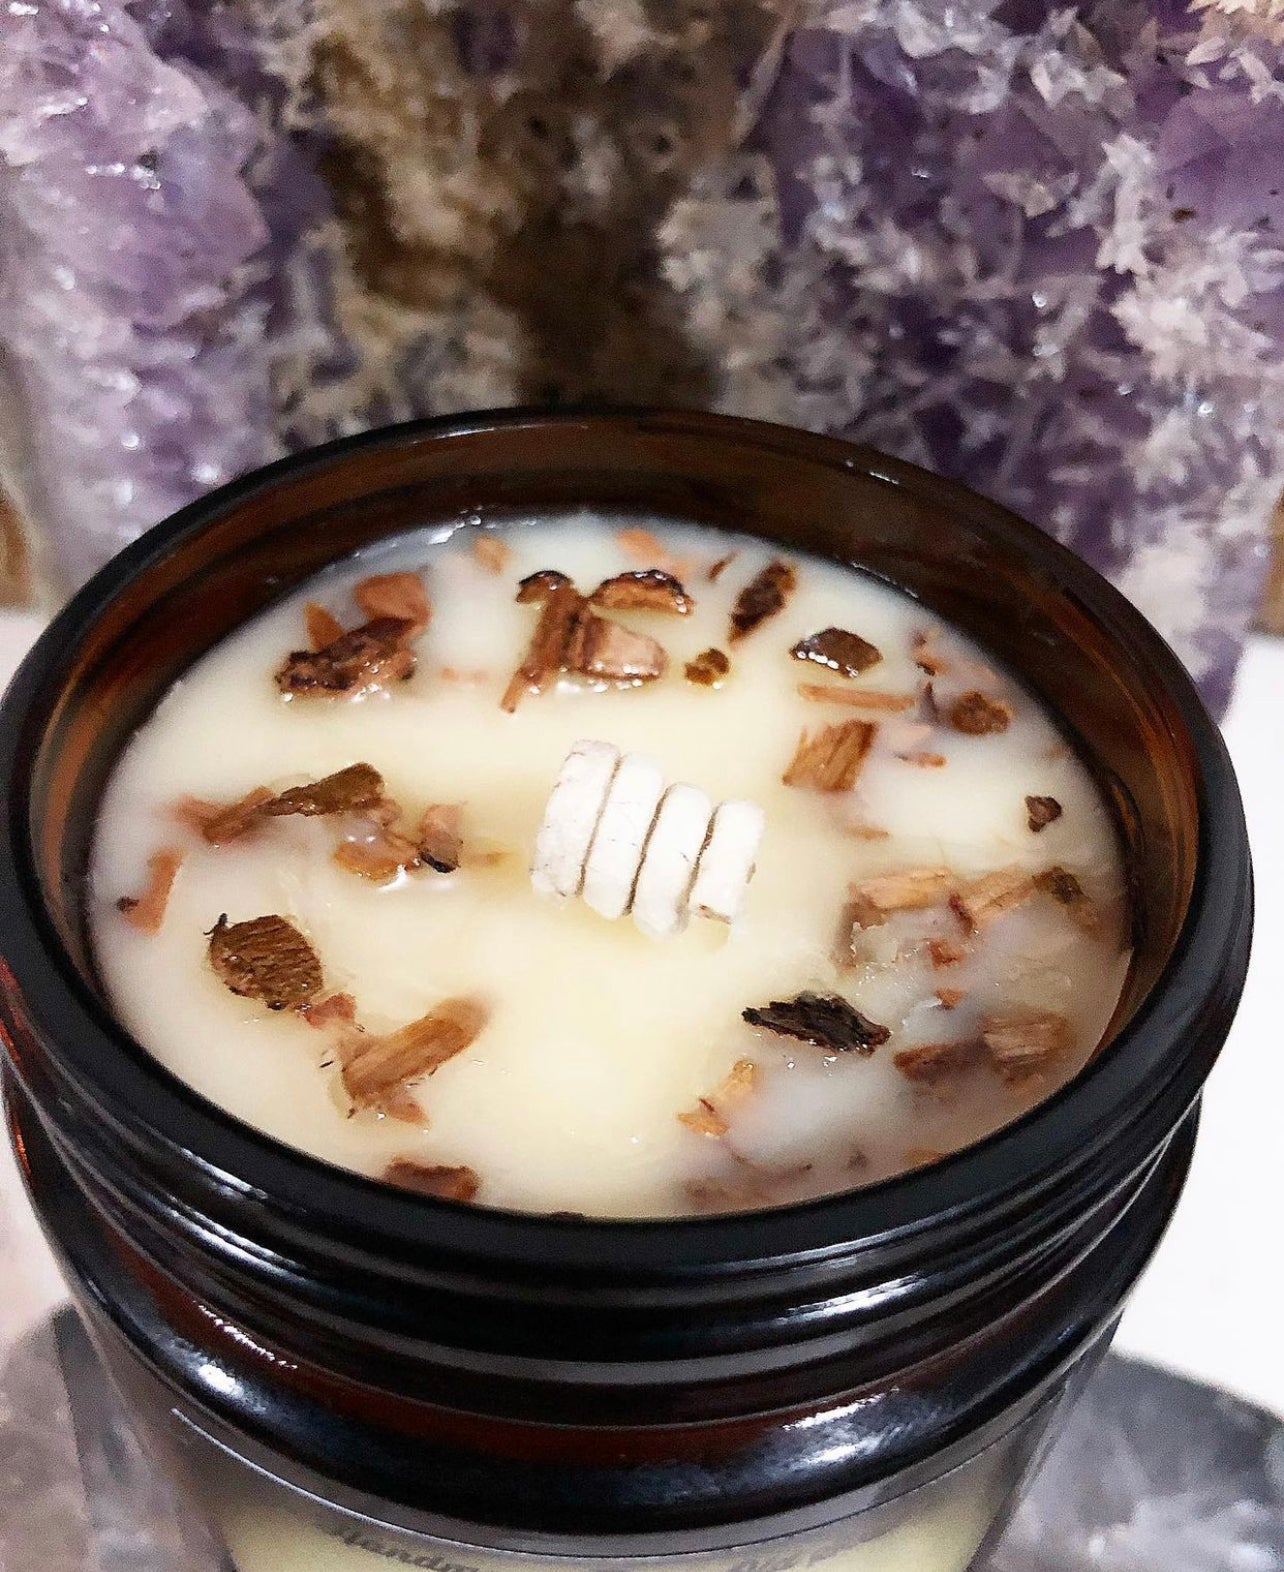 Cedarwood & Cinnamon Organic Candle ~ Essential Oils ~ All Natural *~ No Perfumes ~ Hand Poured *